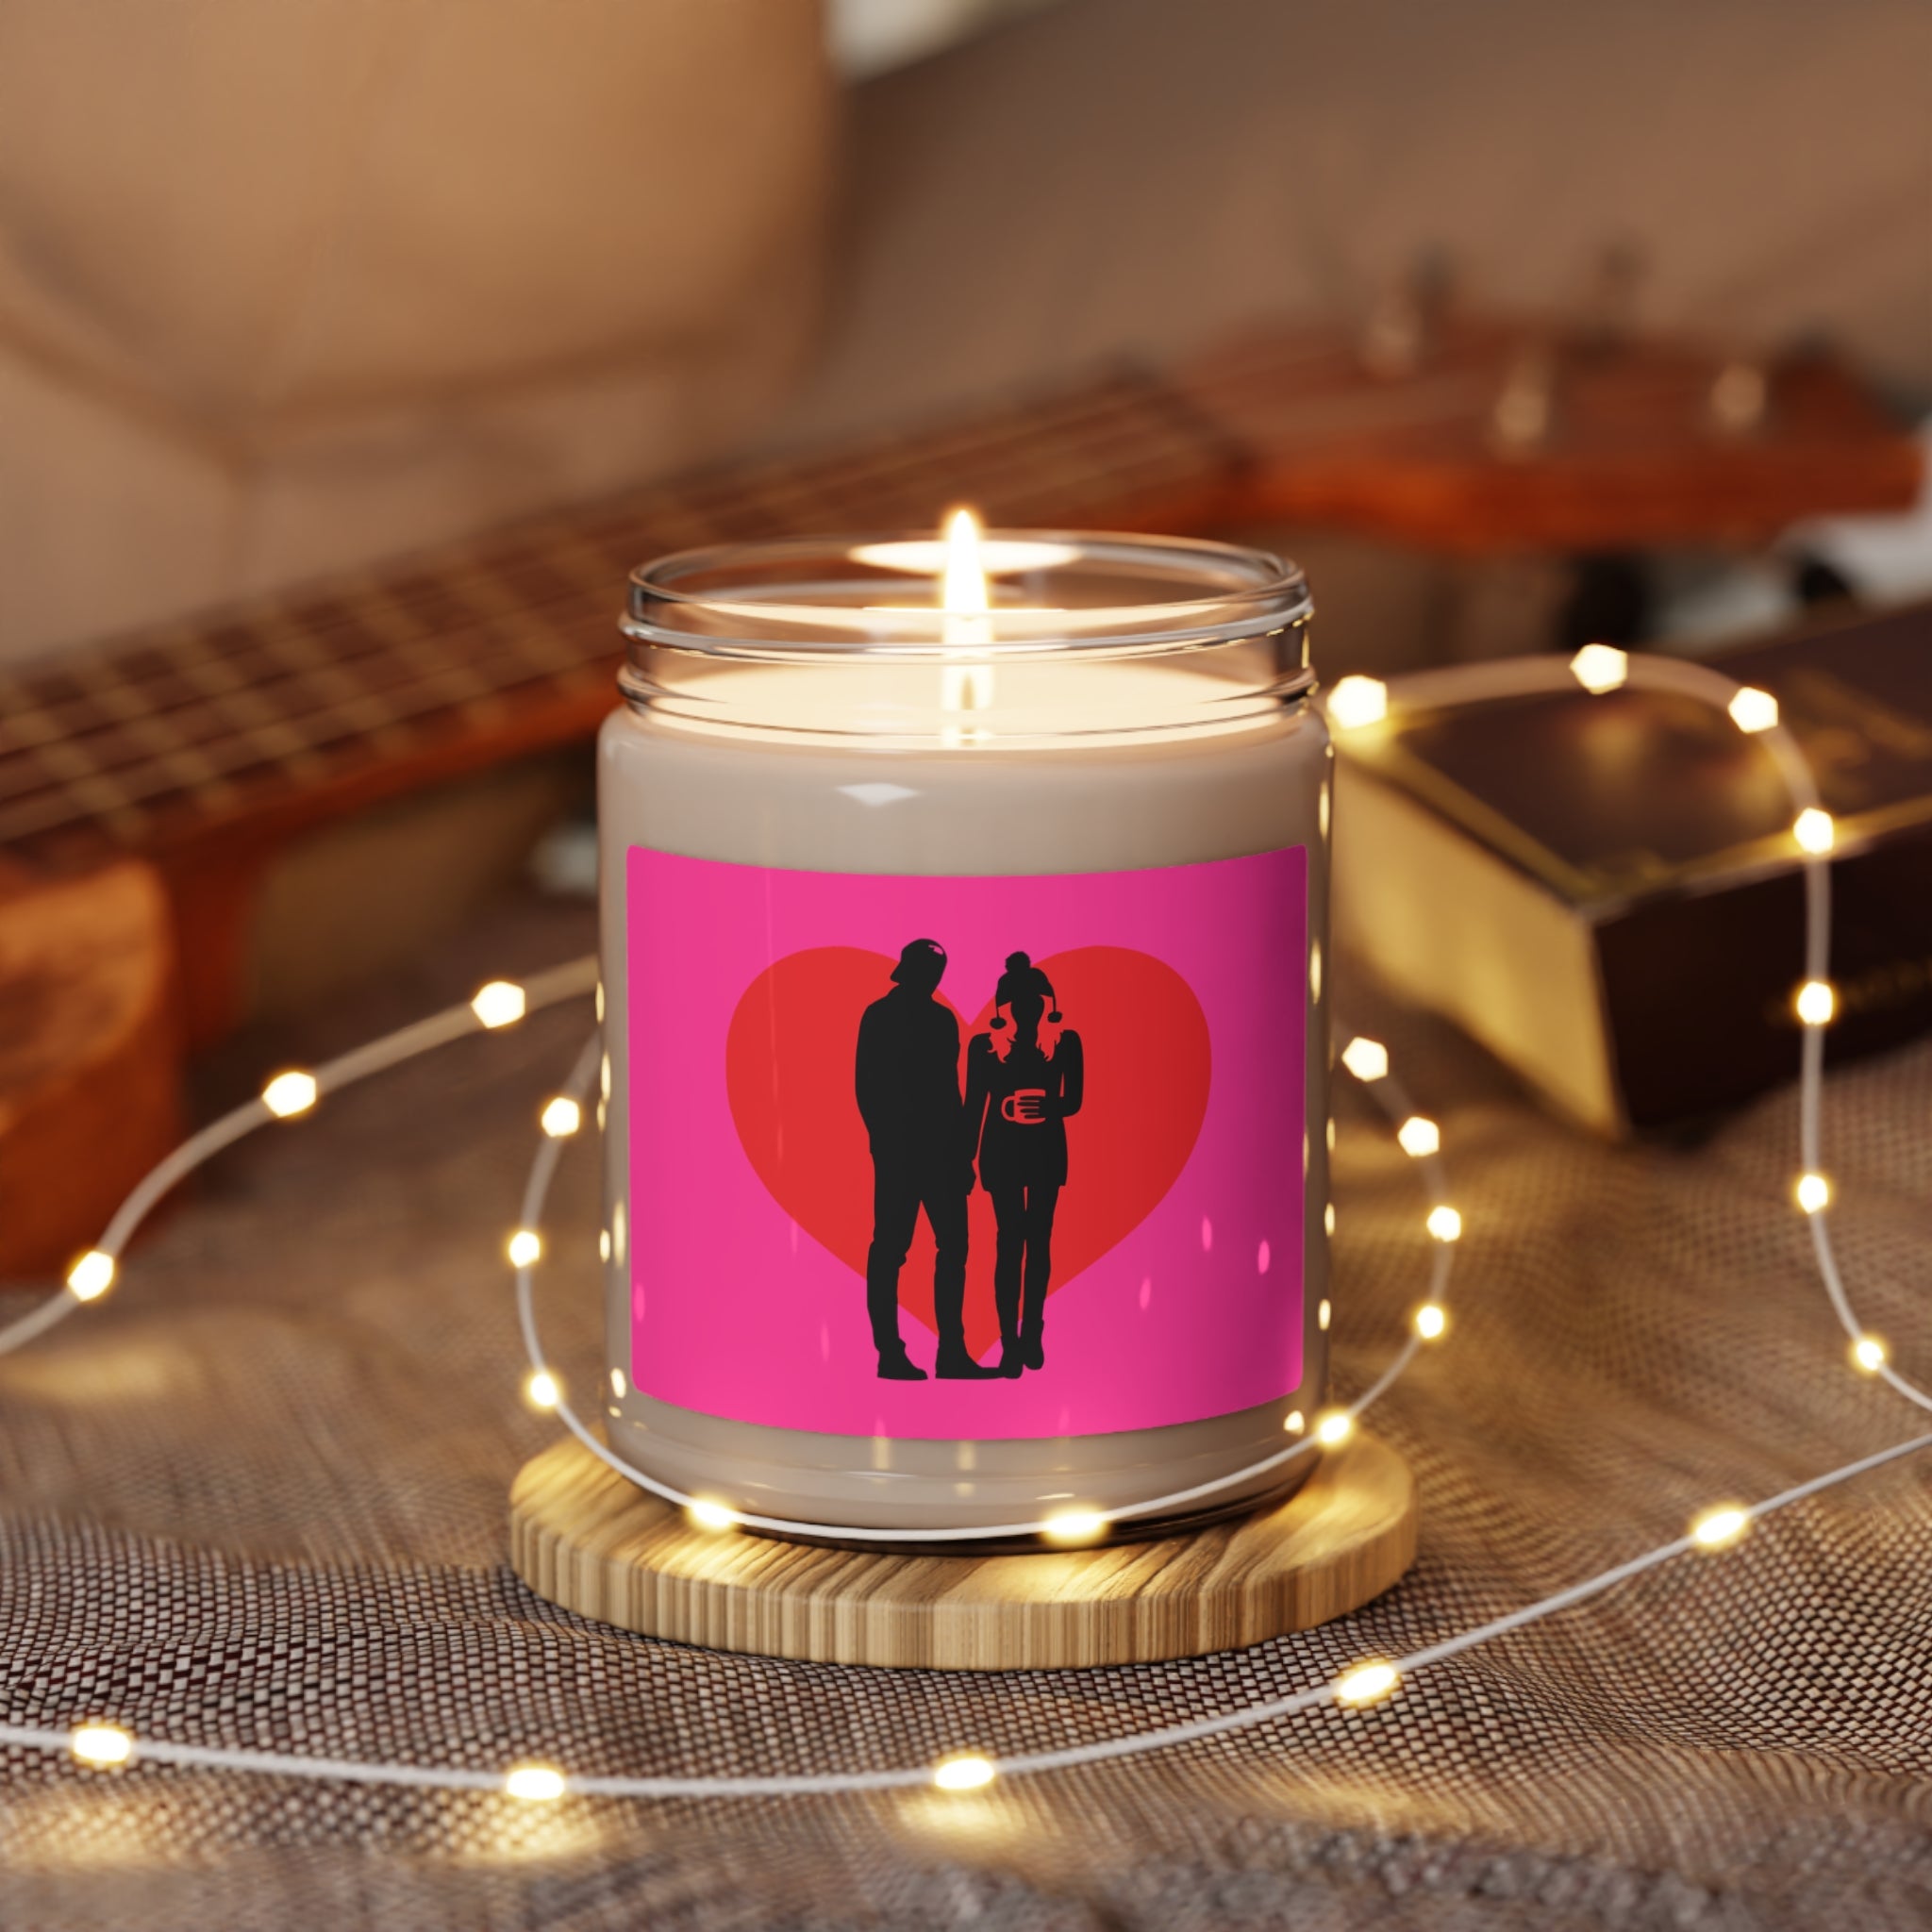 Gilmore Girls Luke and Lorelai Valentines Day Scented Soy Candle